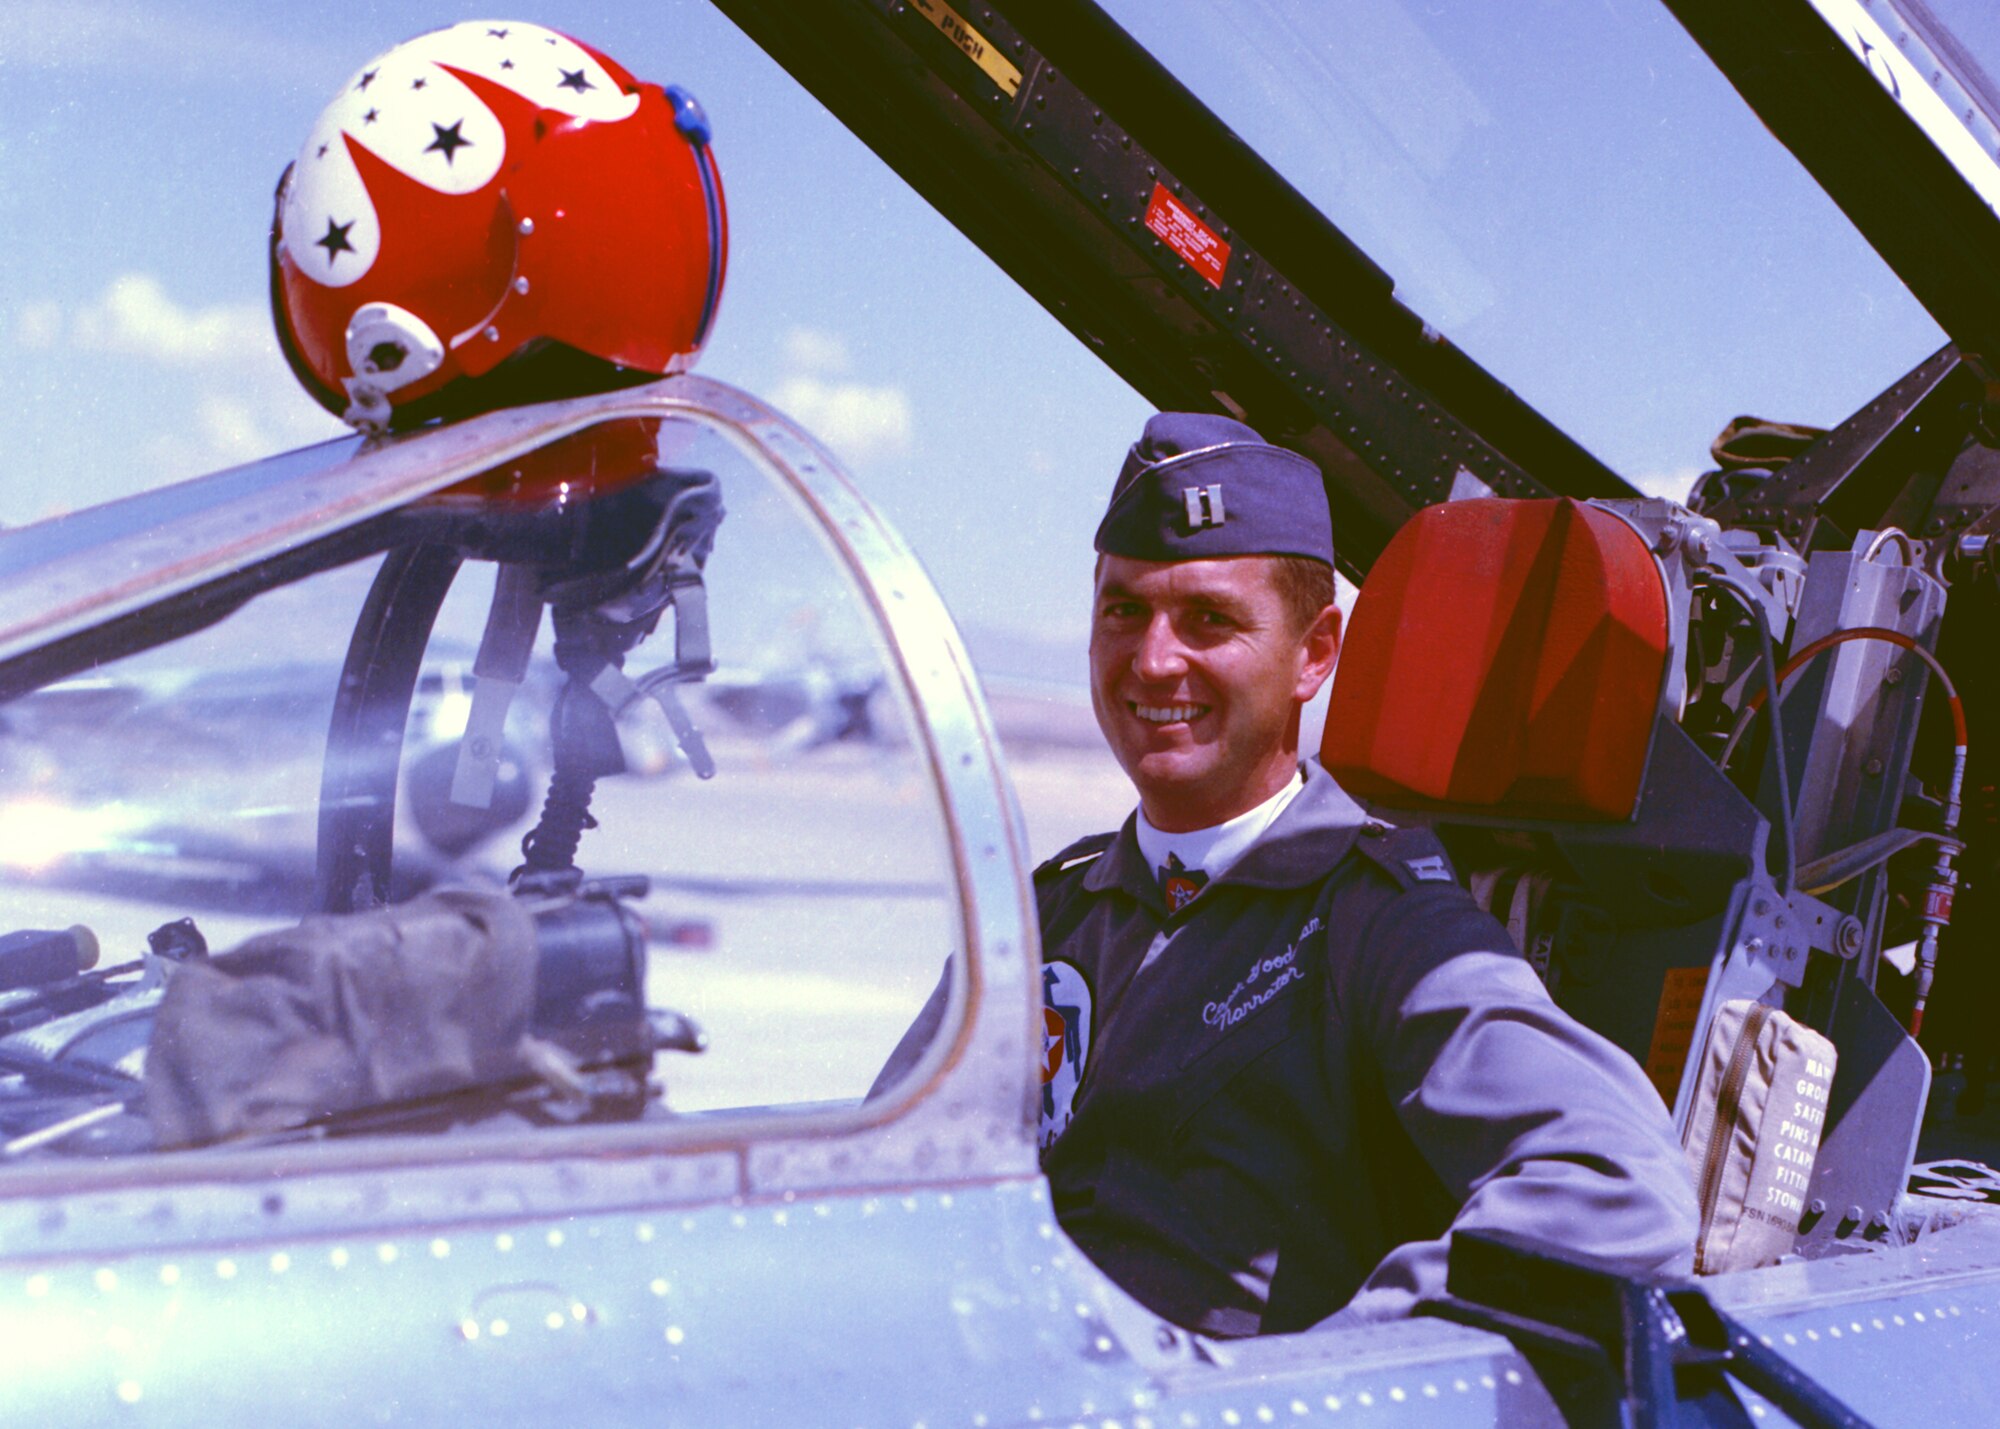 Maj. Russell C. Goodman, a U.S. Air Force pilot that was killed in action in Vietnam on Feb. 20, 1967.  At the time of his loss, Major Goodman was assigned to the U.S. Air Force Air Demonstration Squadron “Thunderbirds” at Nellis Air Force Base and was flying with the U.S. Navy on an exchange program.